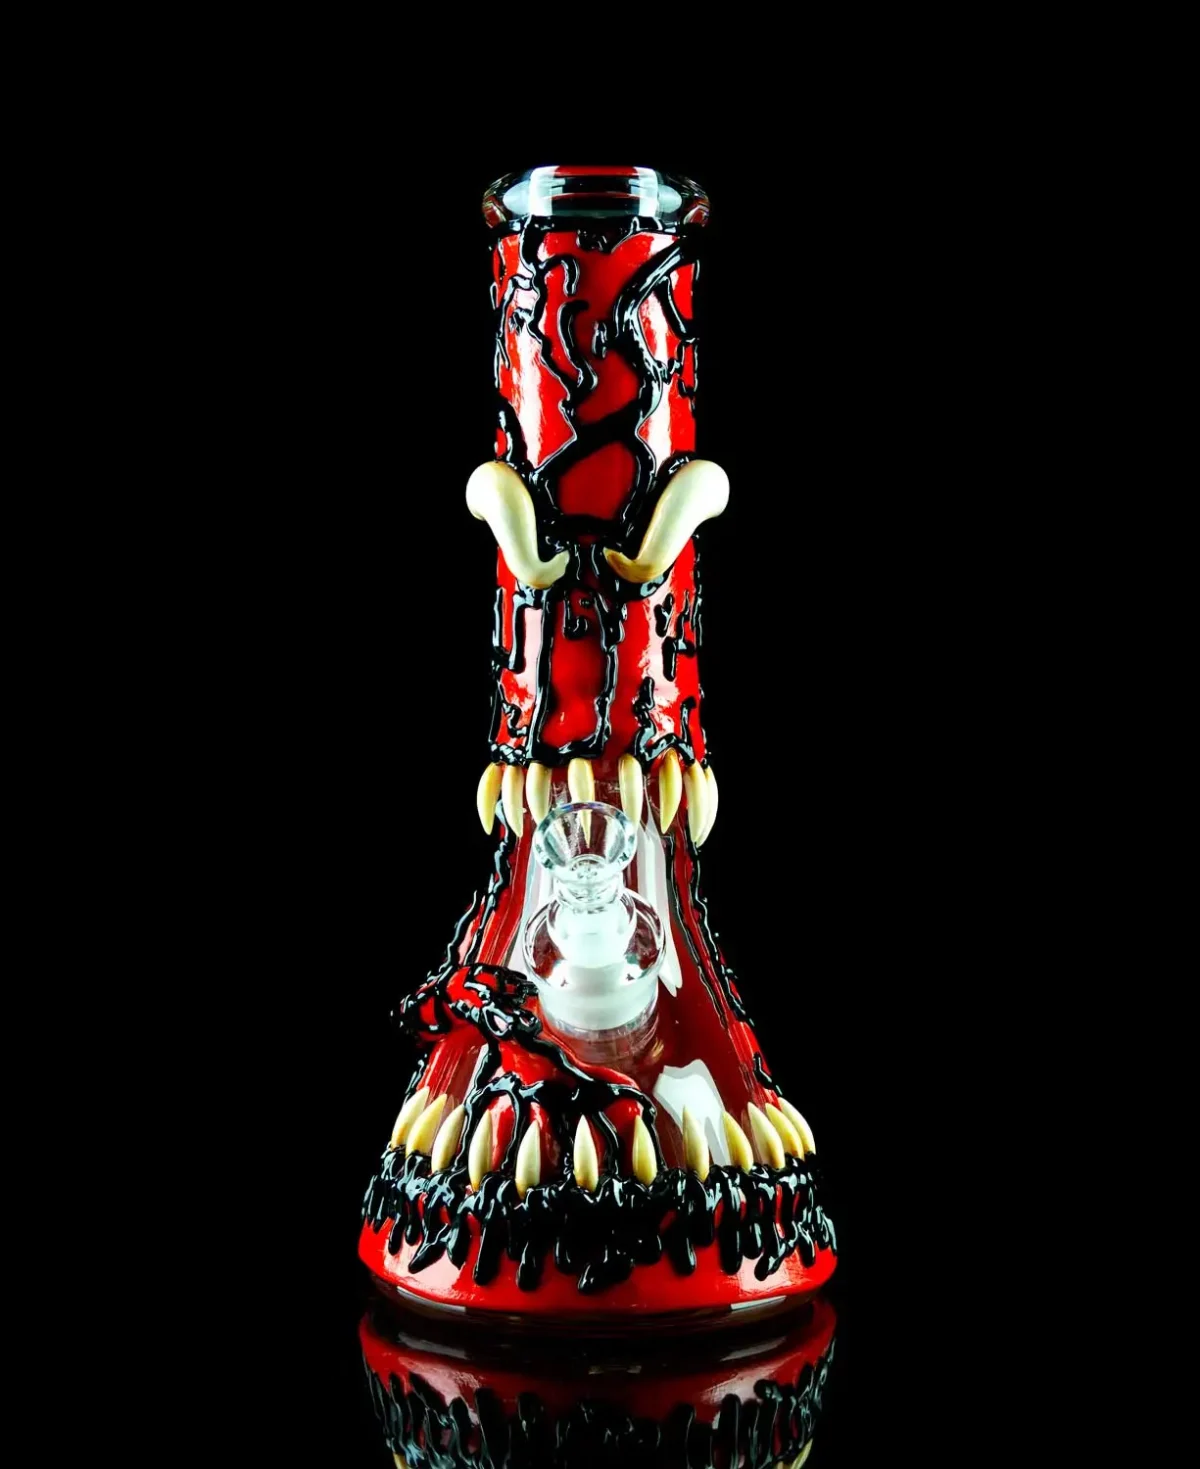 venom glass bong made from hand painted clay